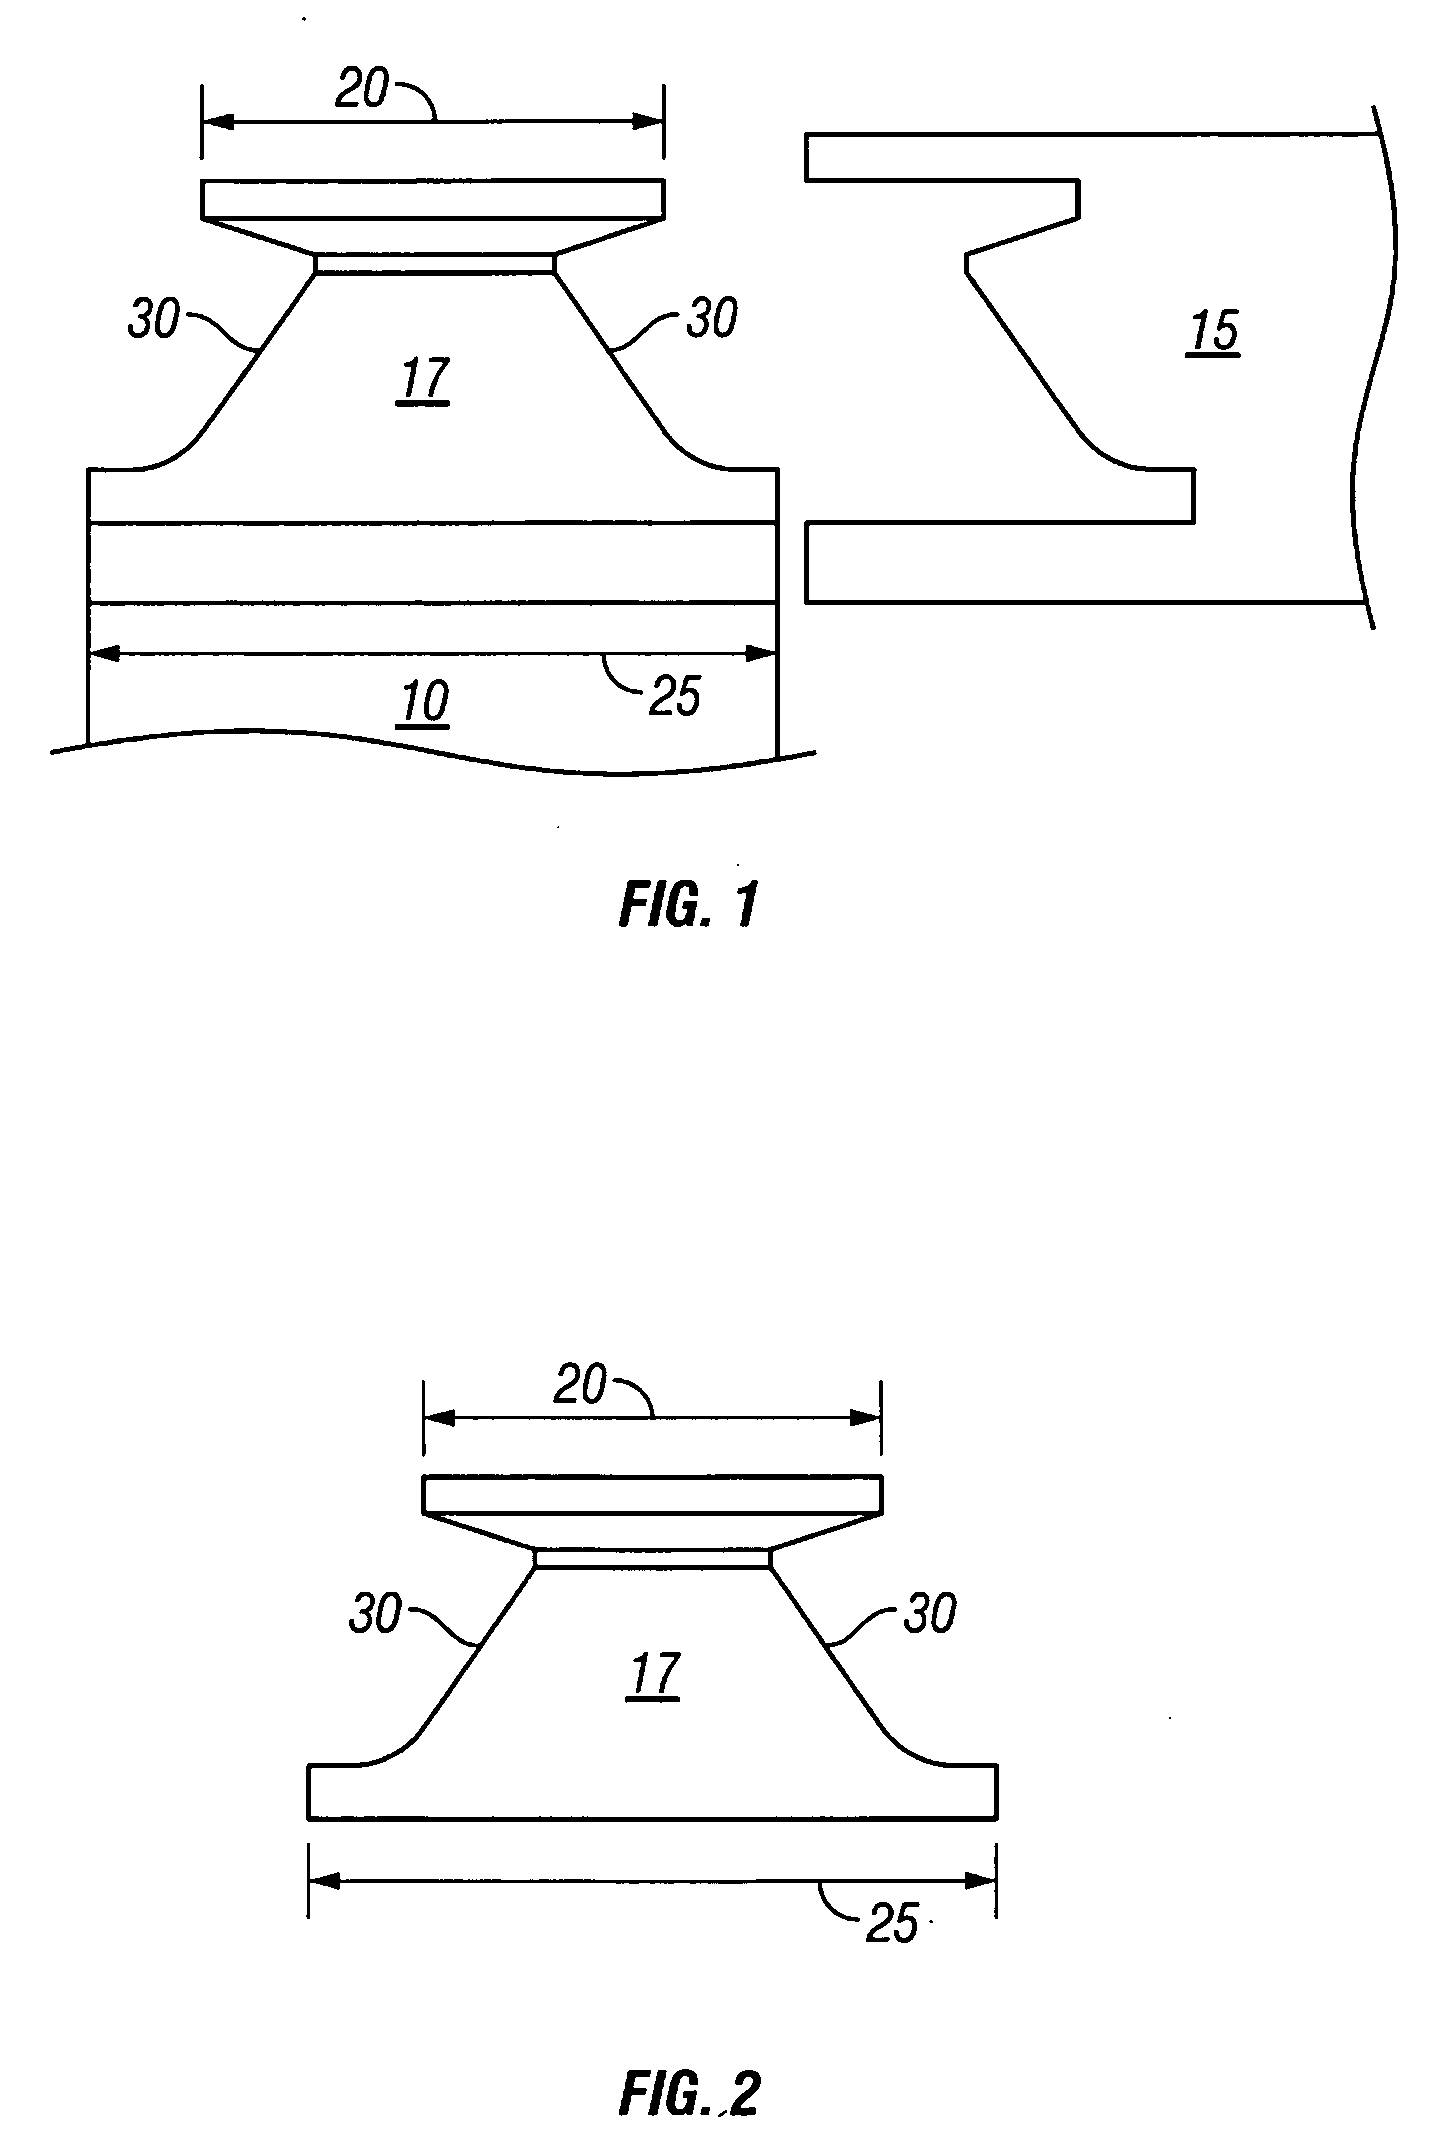 Method and apparatus for reducing or eliminating the progression of myopia